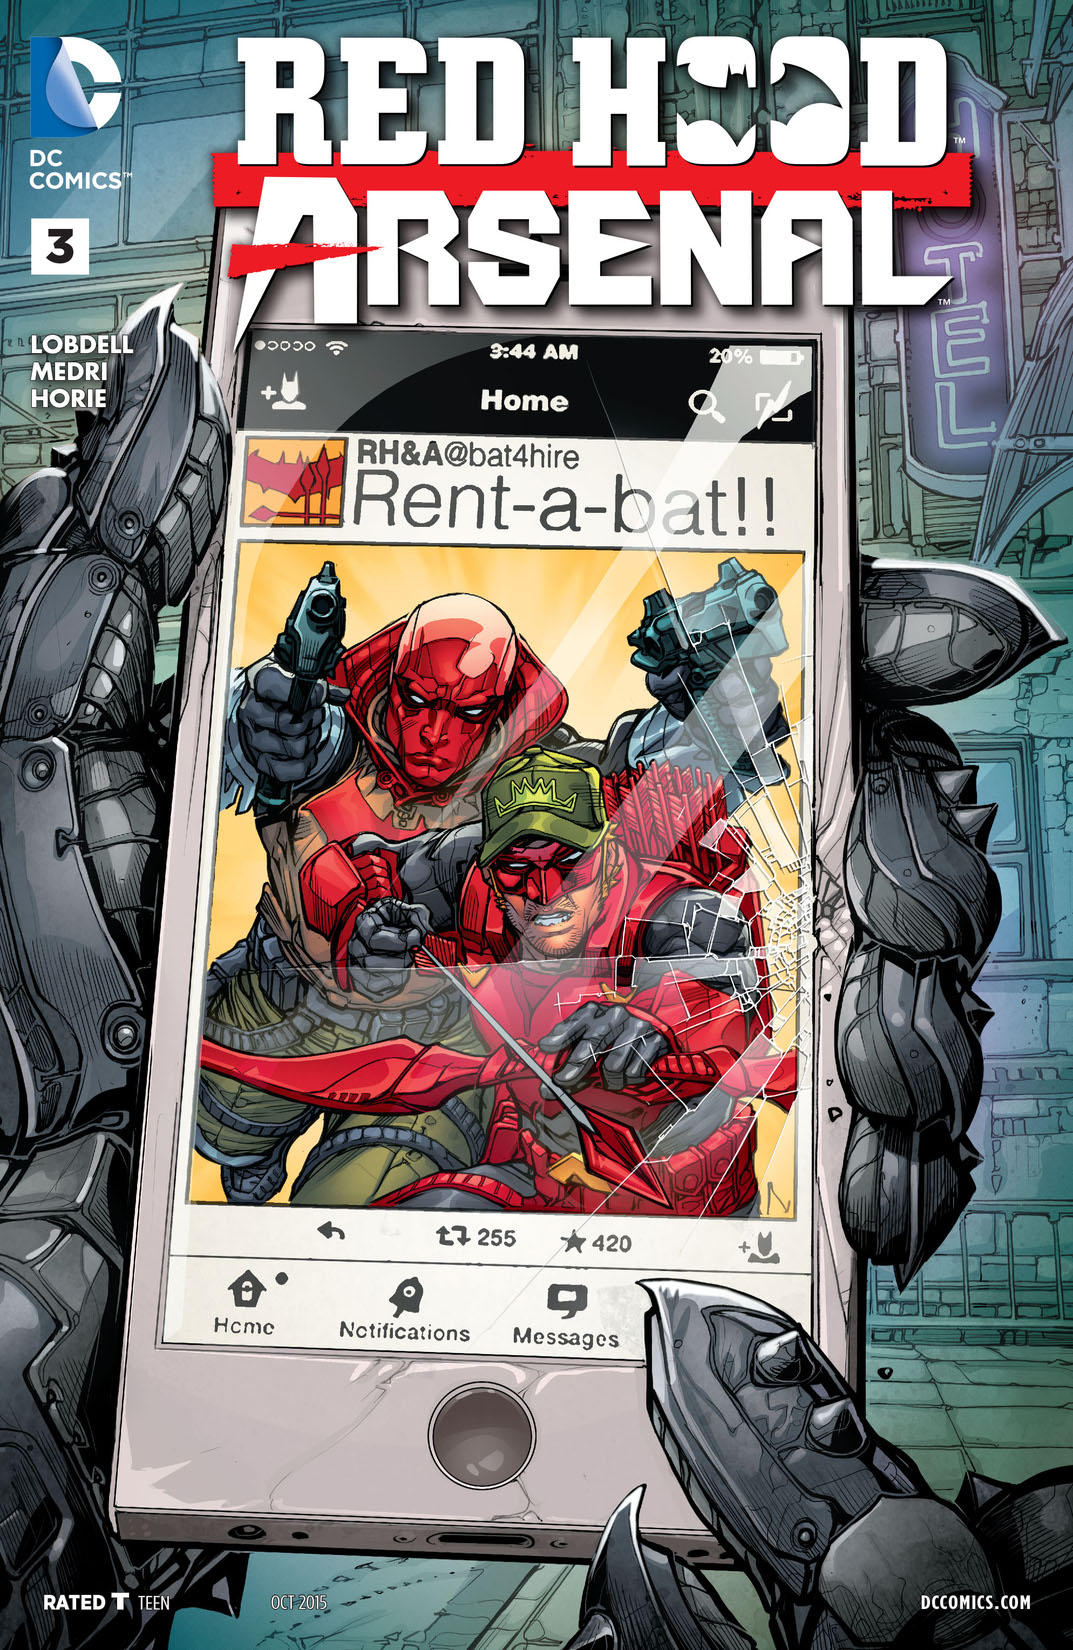 Red Hood/Arsenal #3 preview images